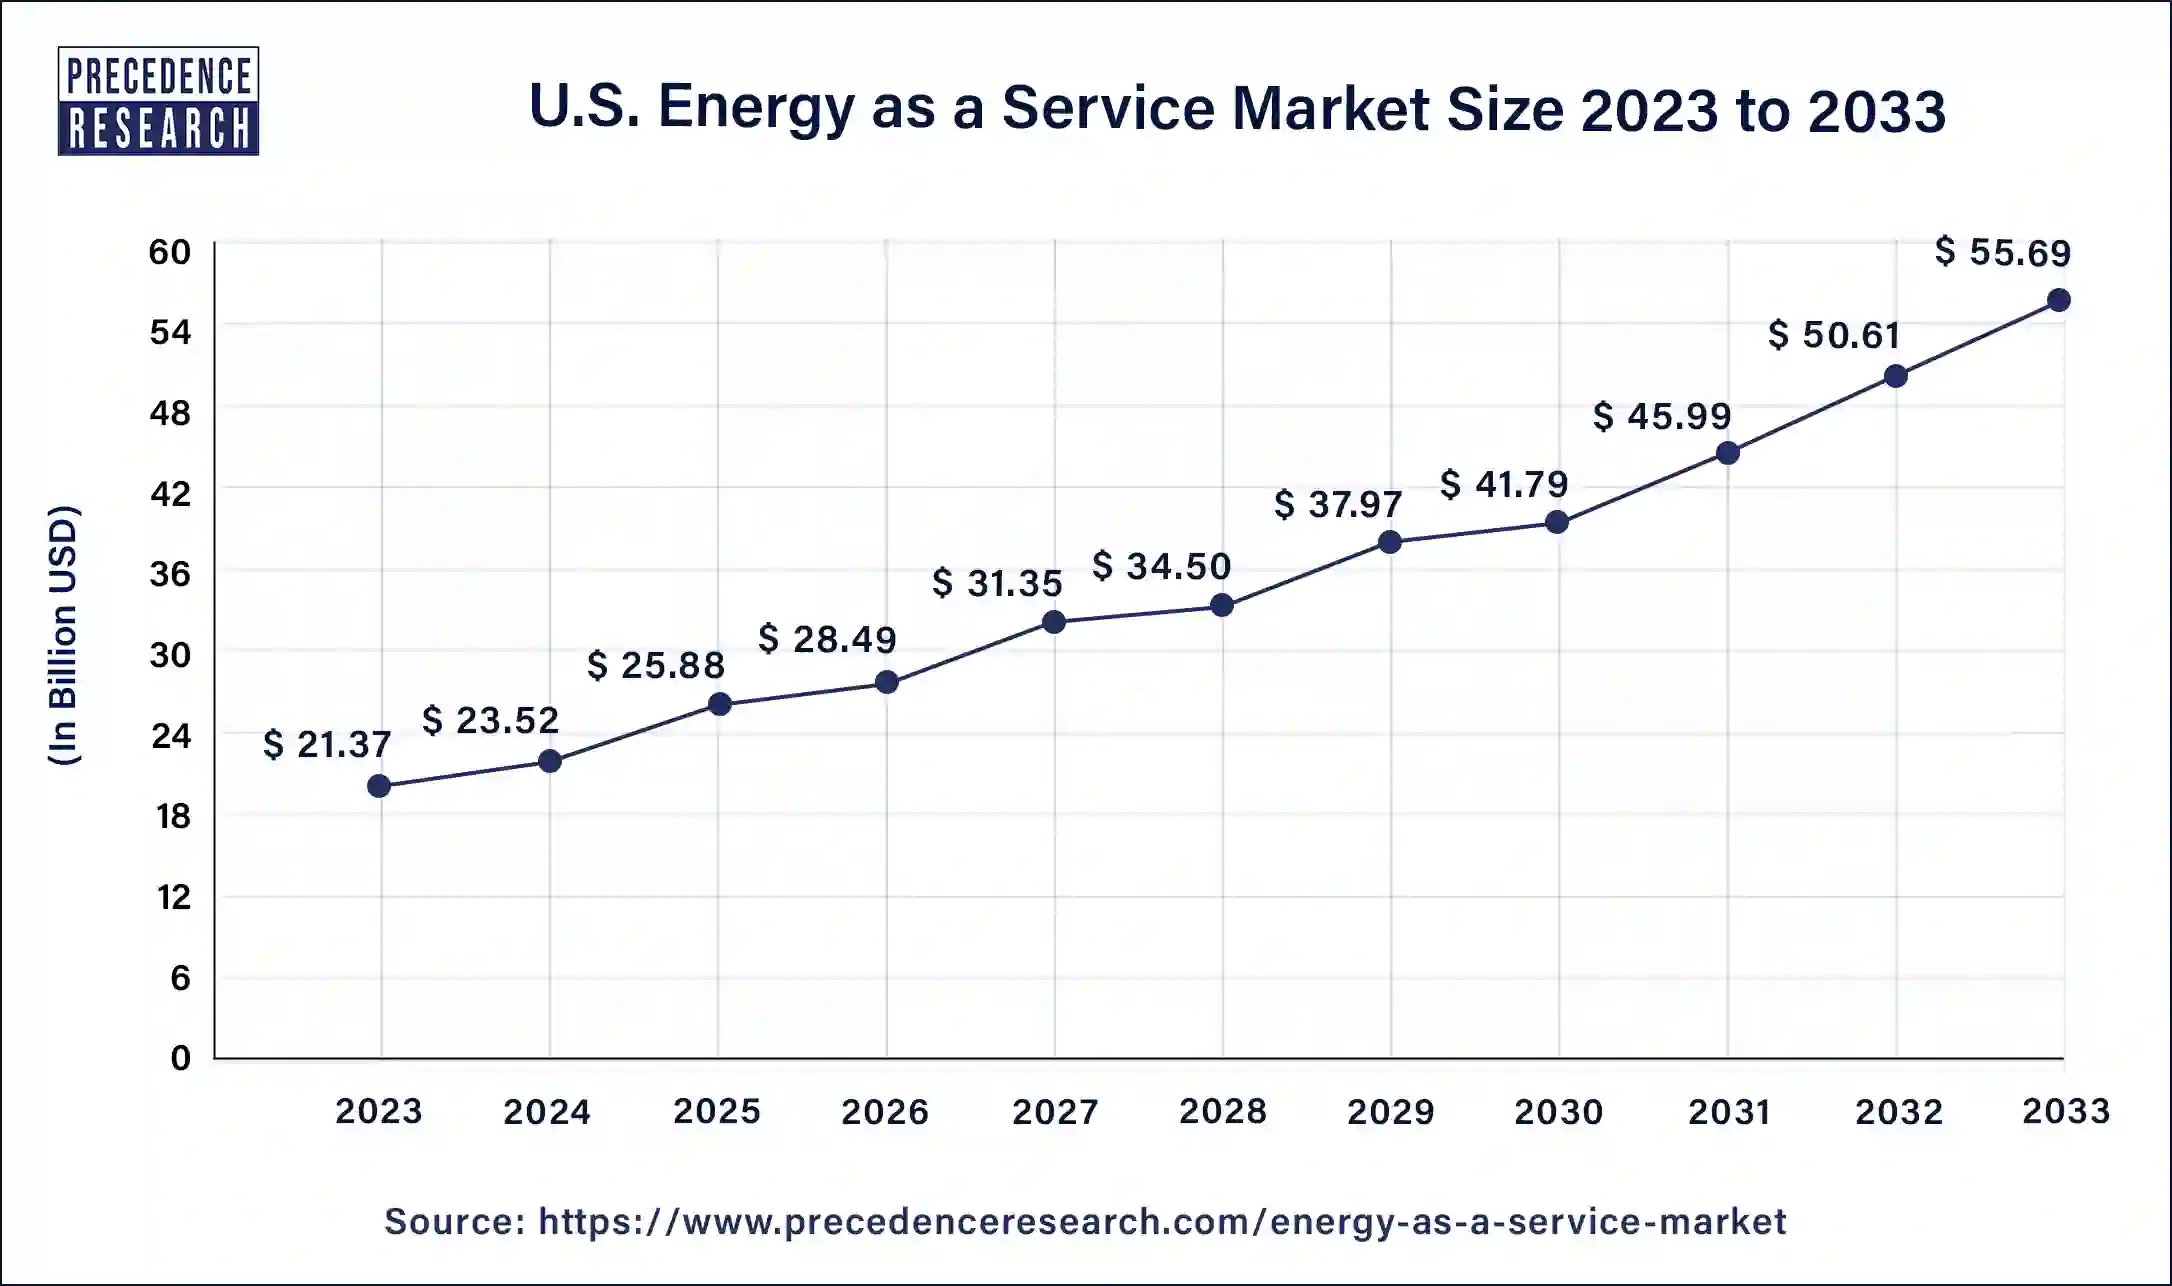 U.S. Energy as a Service Market Size 2024 to 2033